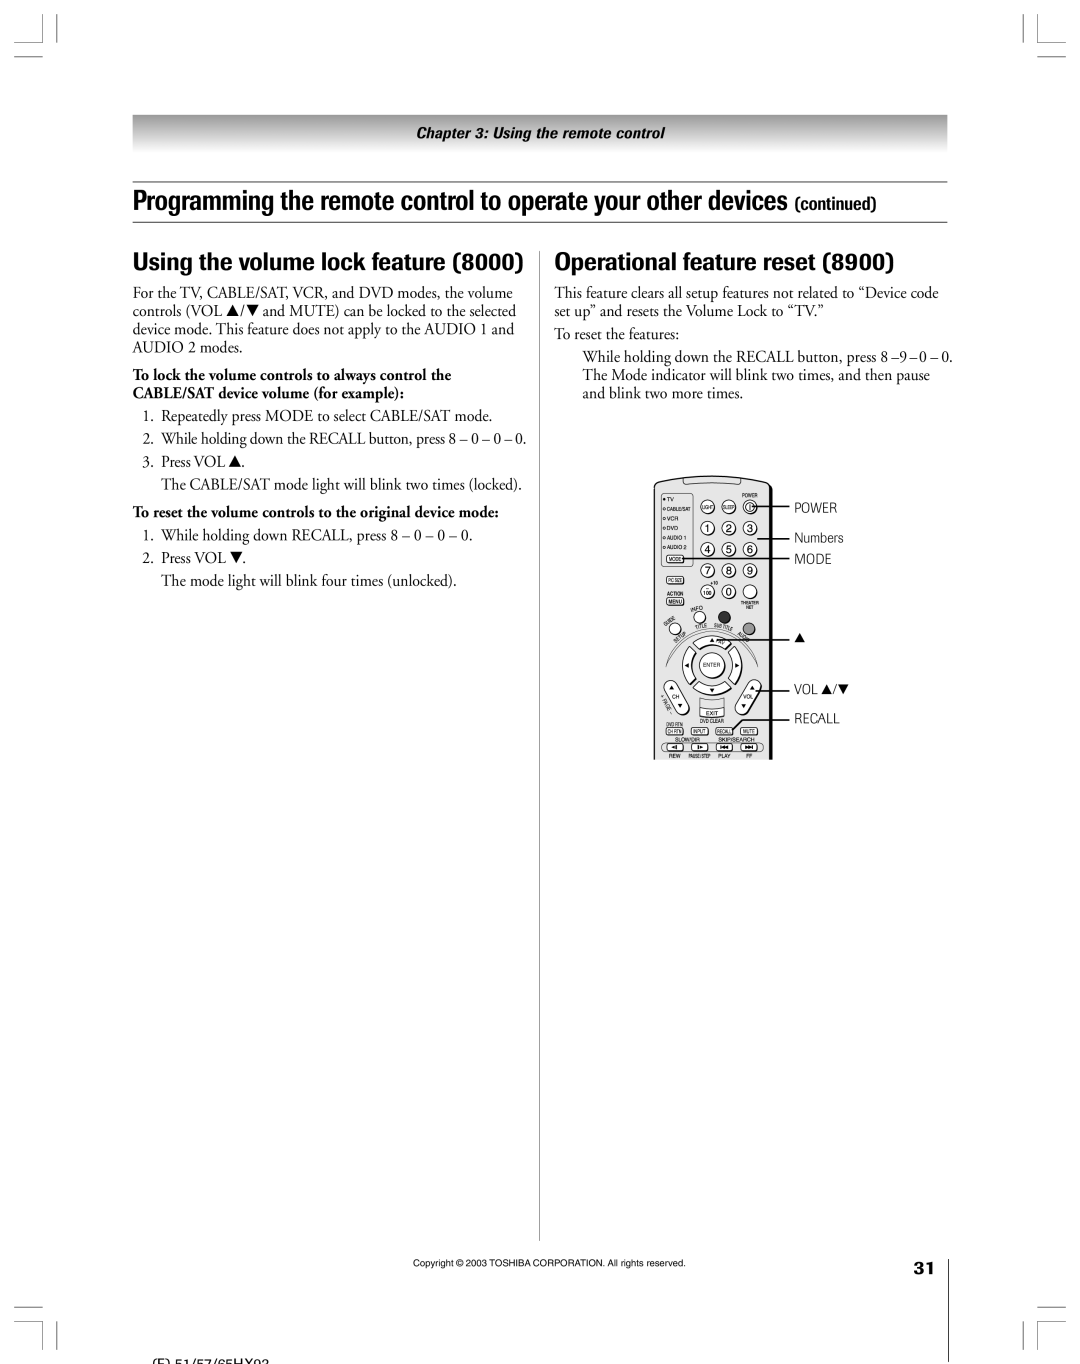 Toshiba 51HX93 owner manual Using the volume lock feature, Operational feature reset 